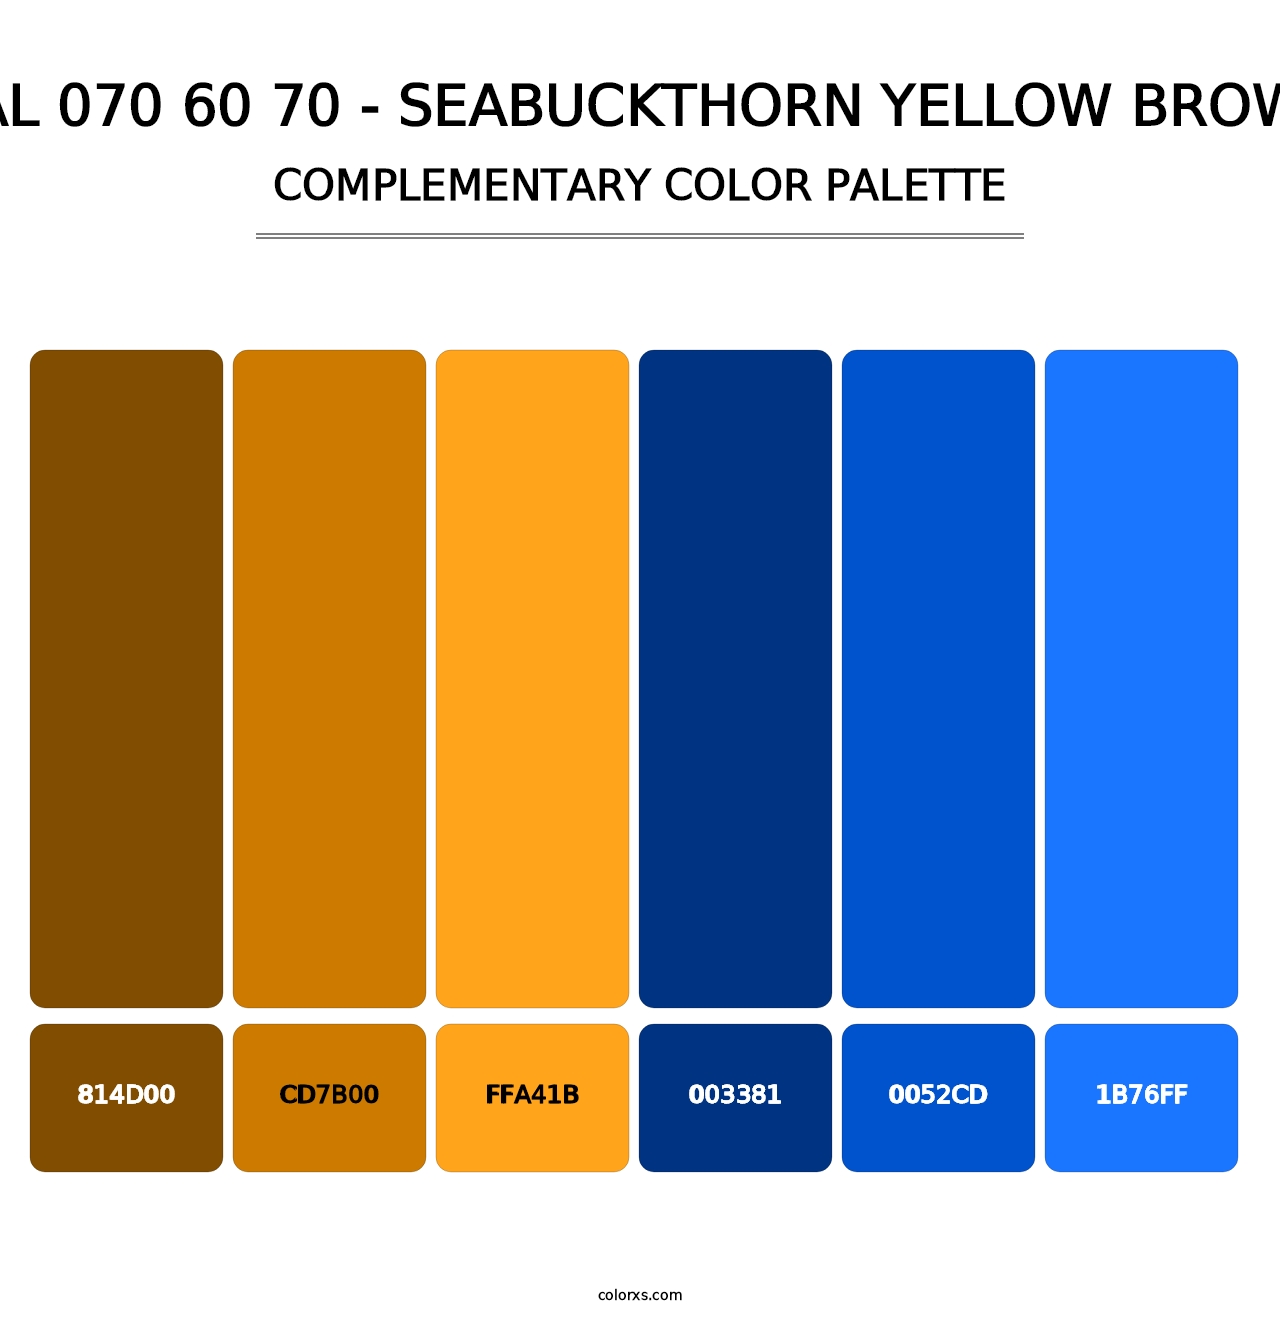 RAL 070 60 70 - Seabuckthorn Yellow Brown - Complementary Color Palette